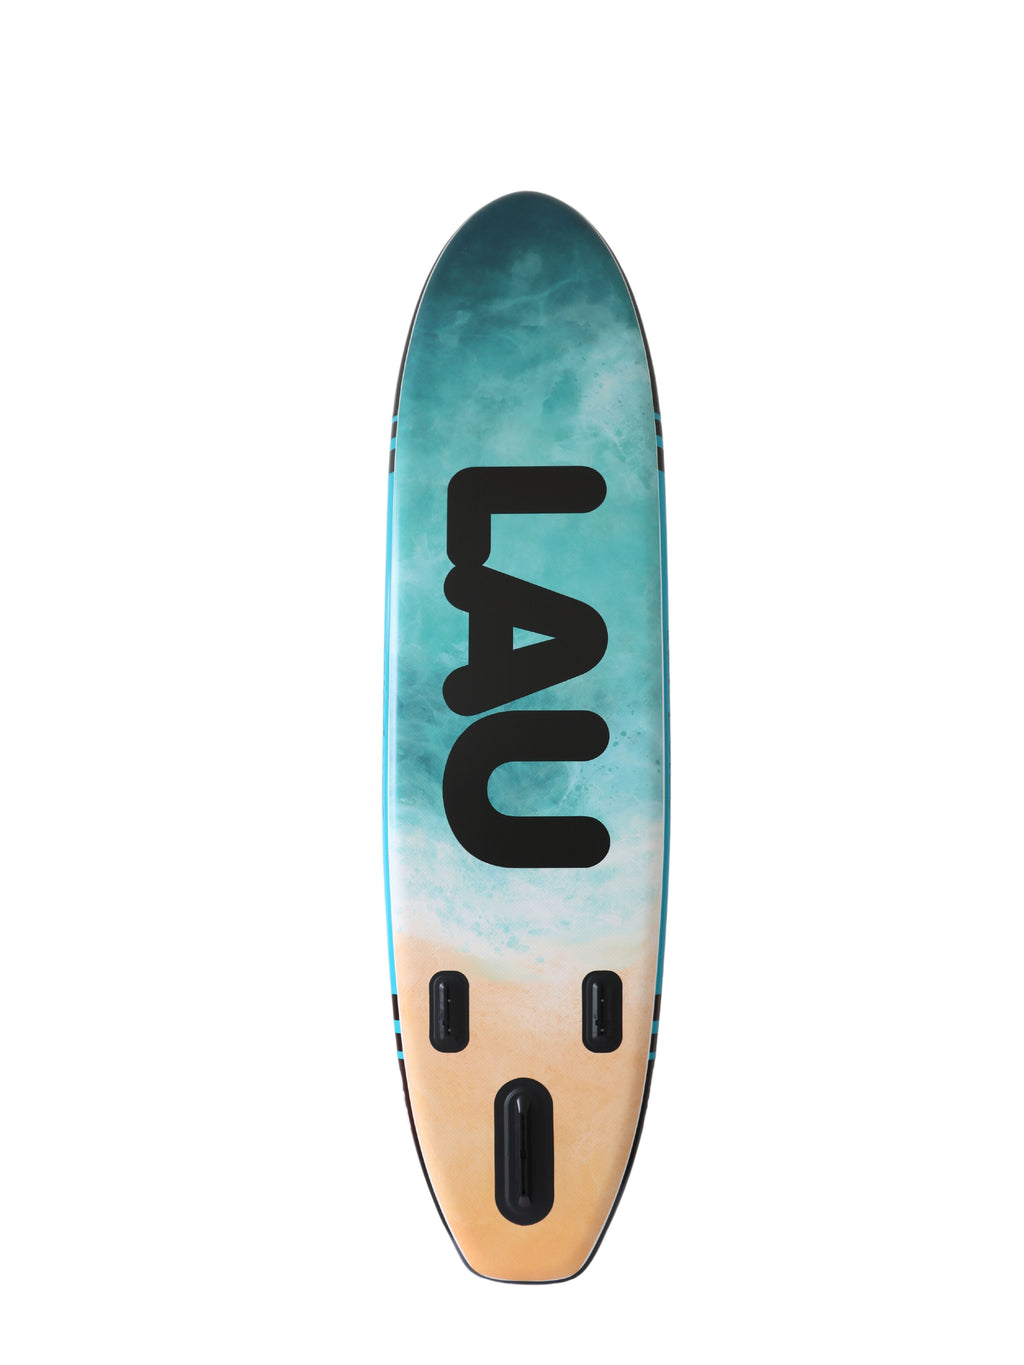 Coastal- 10'6 All-around- Inflatable paddle board